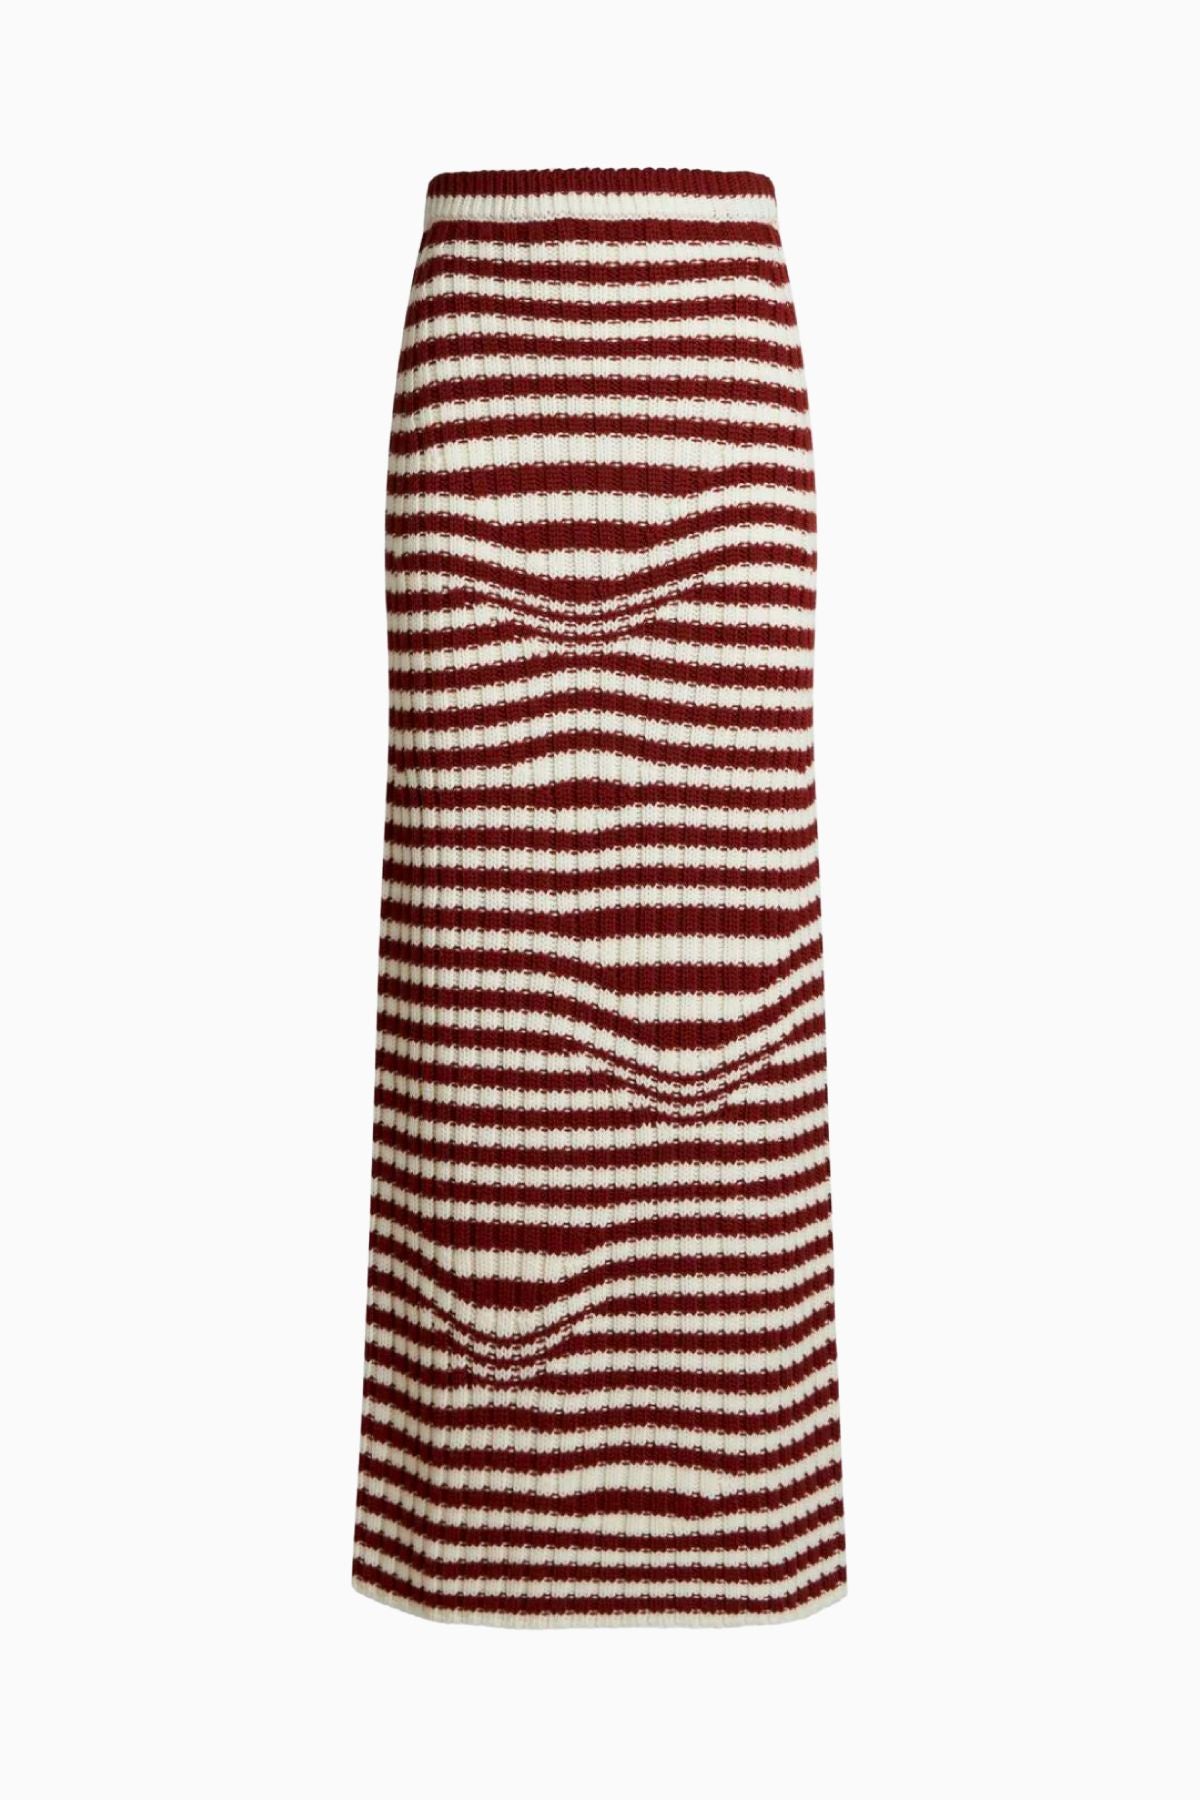 Etro Knitted Striped Midi Skirt - Red